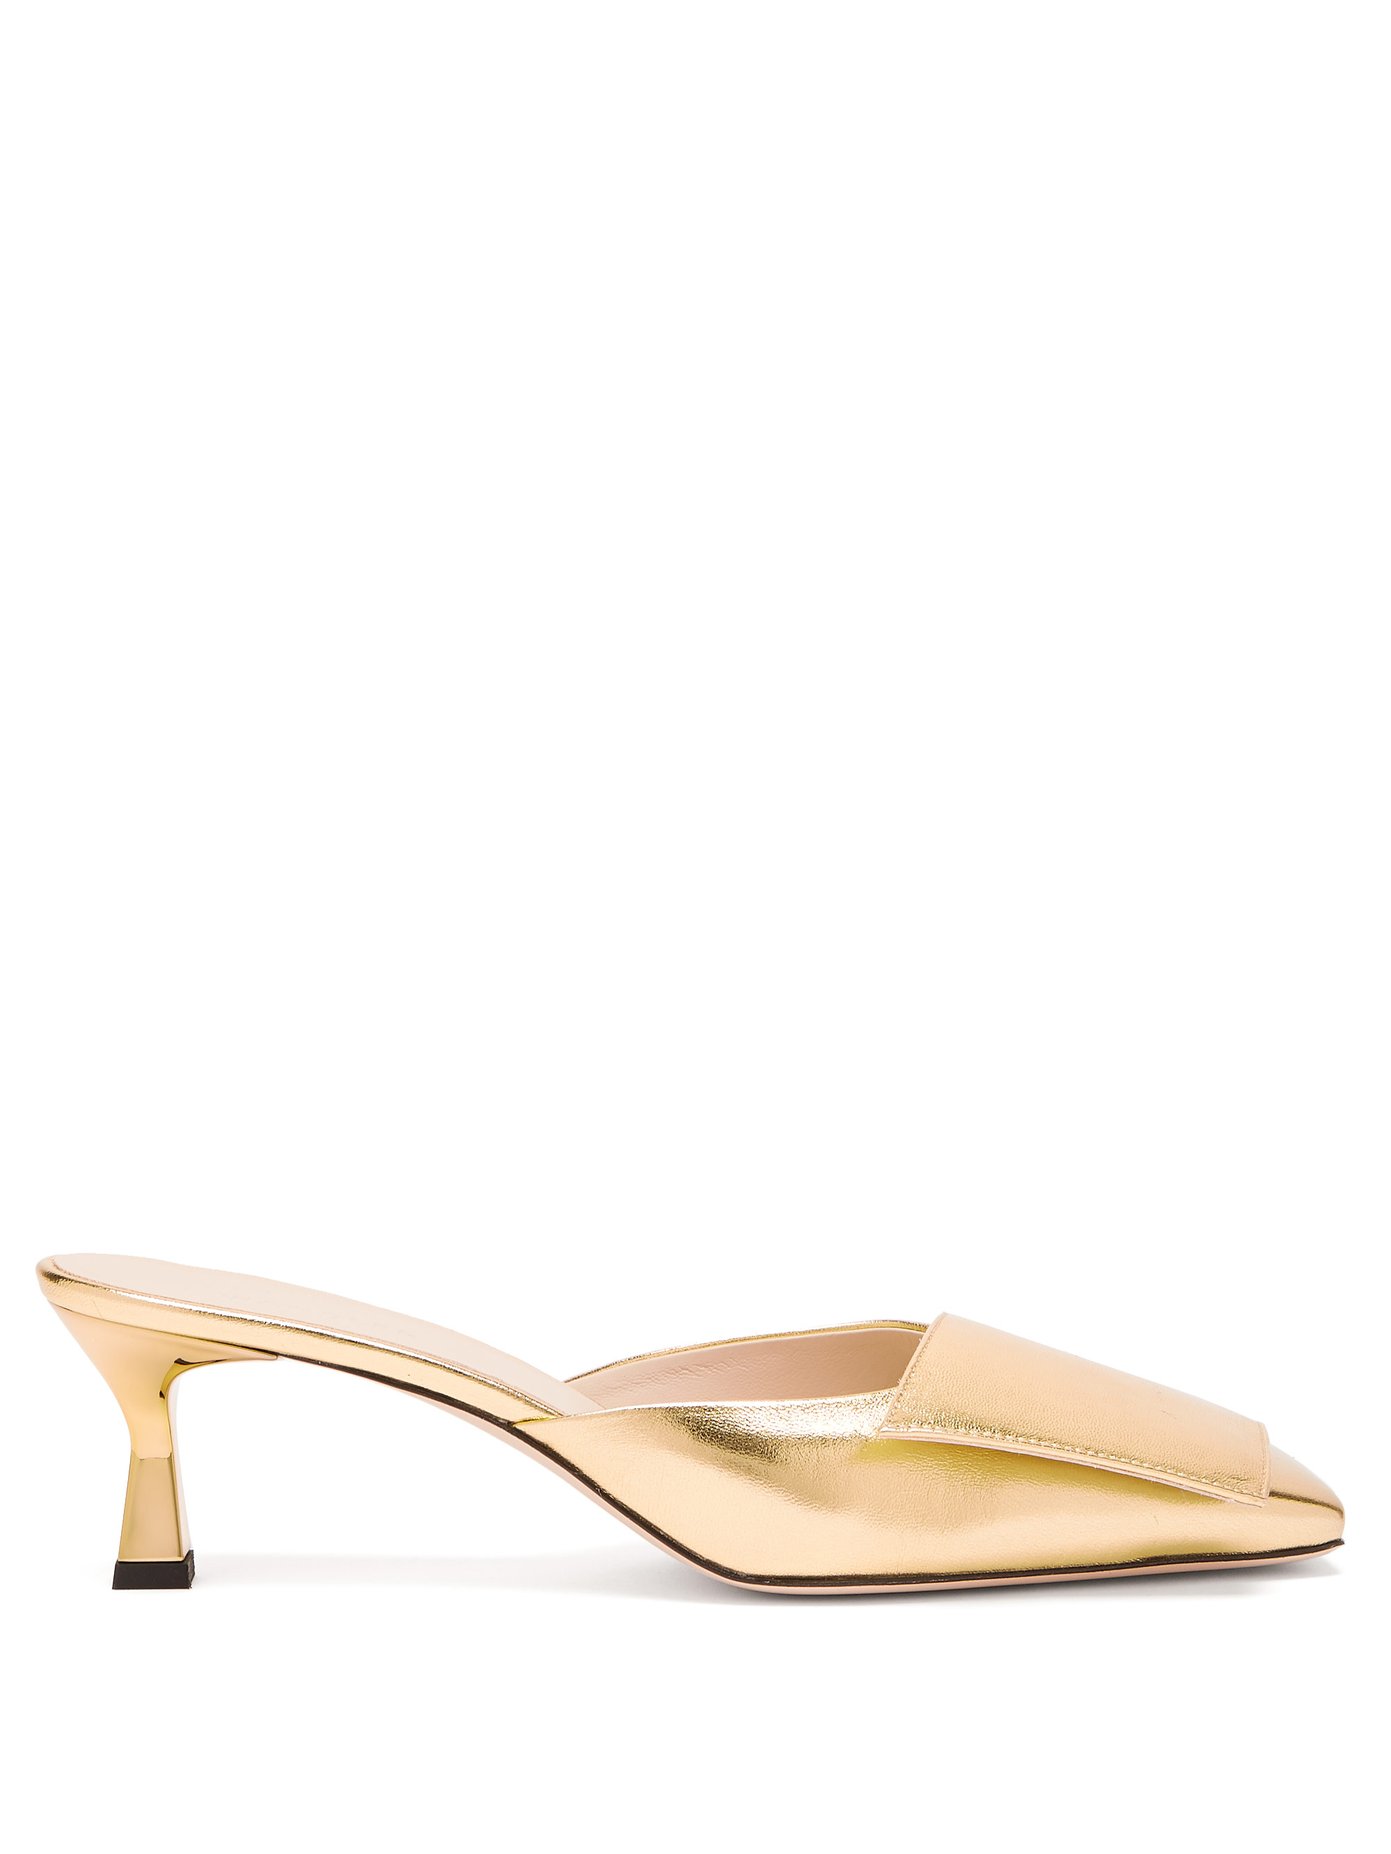 Wandler Isa Square-toe Metallic-leather Mules In Gold | ModeSens